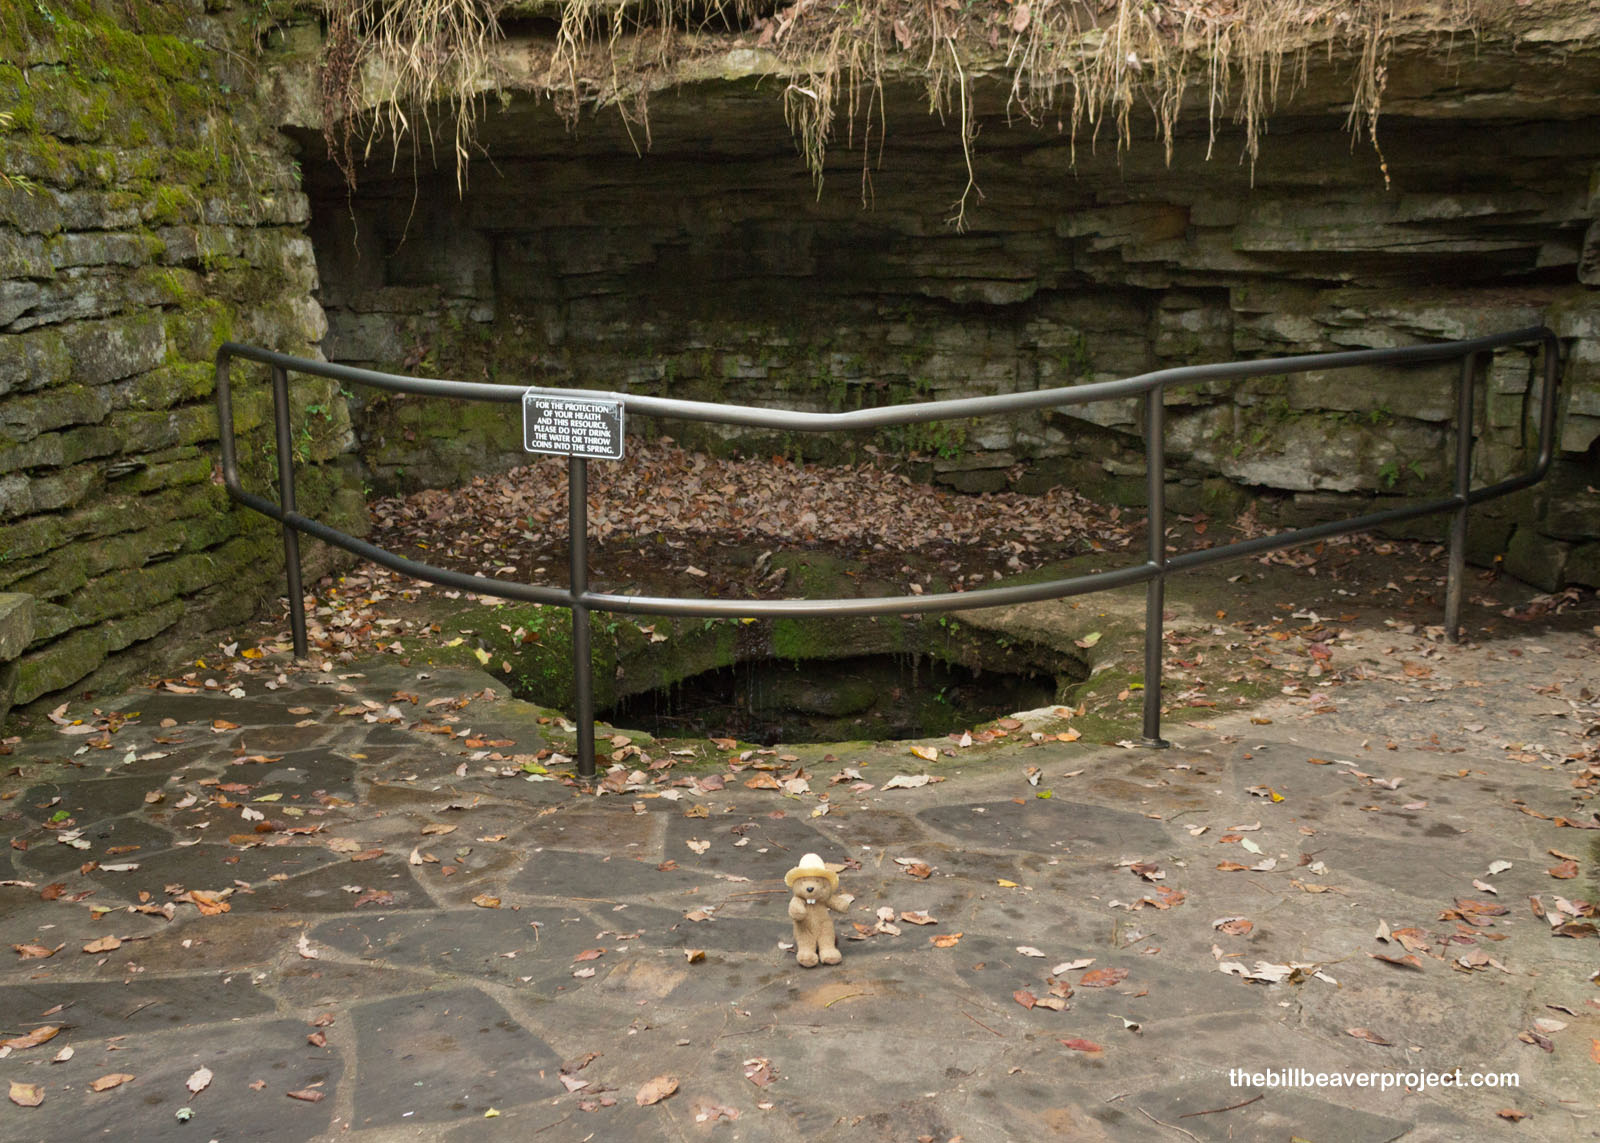 The spring that gave its name to Sinking Spring Farm!